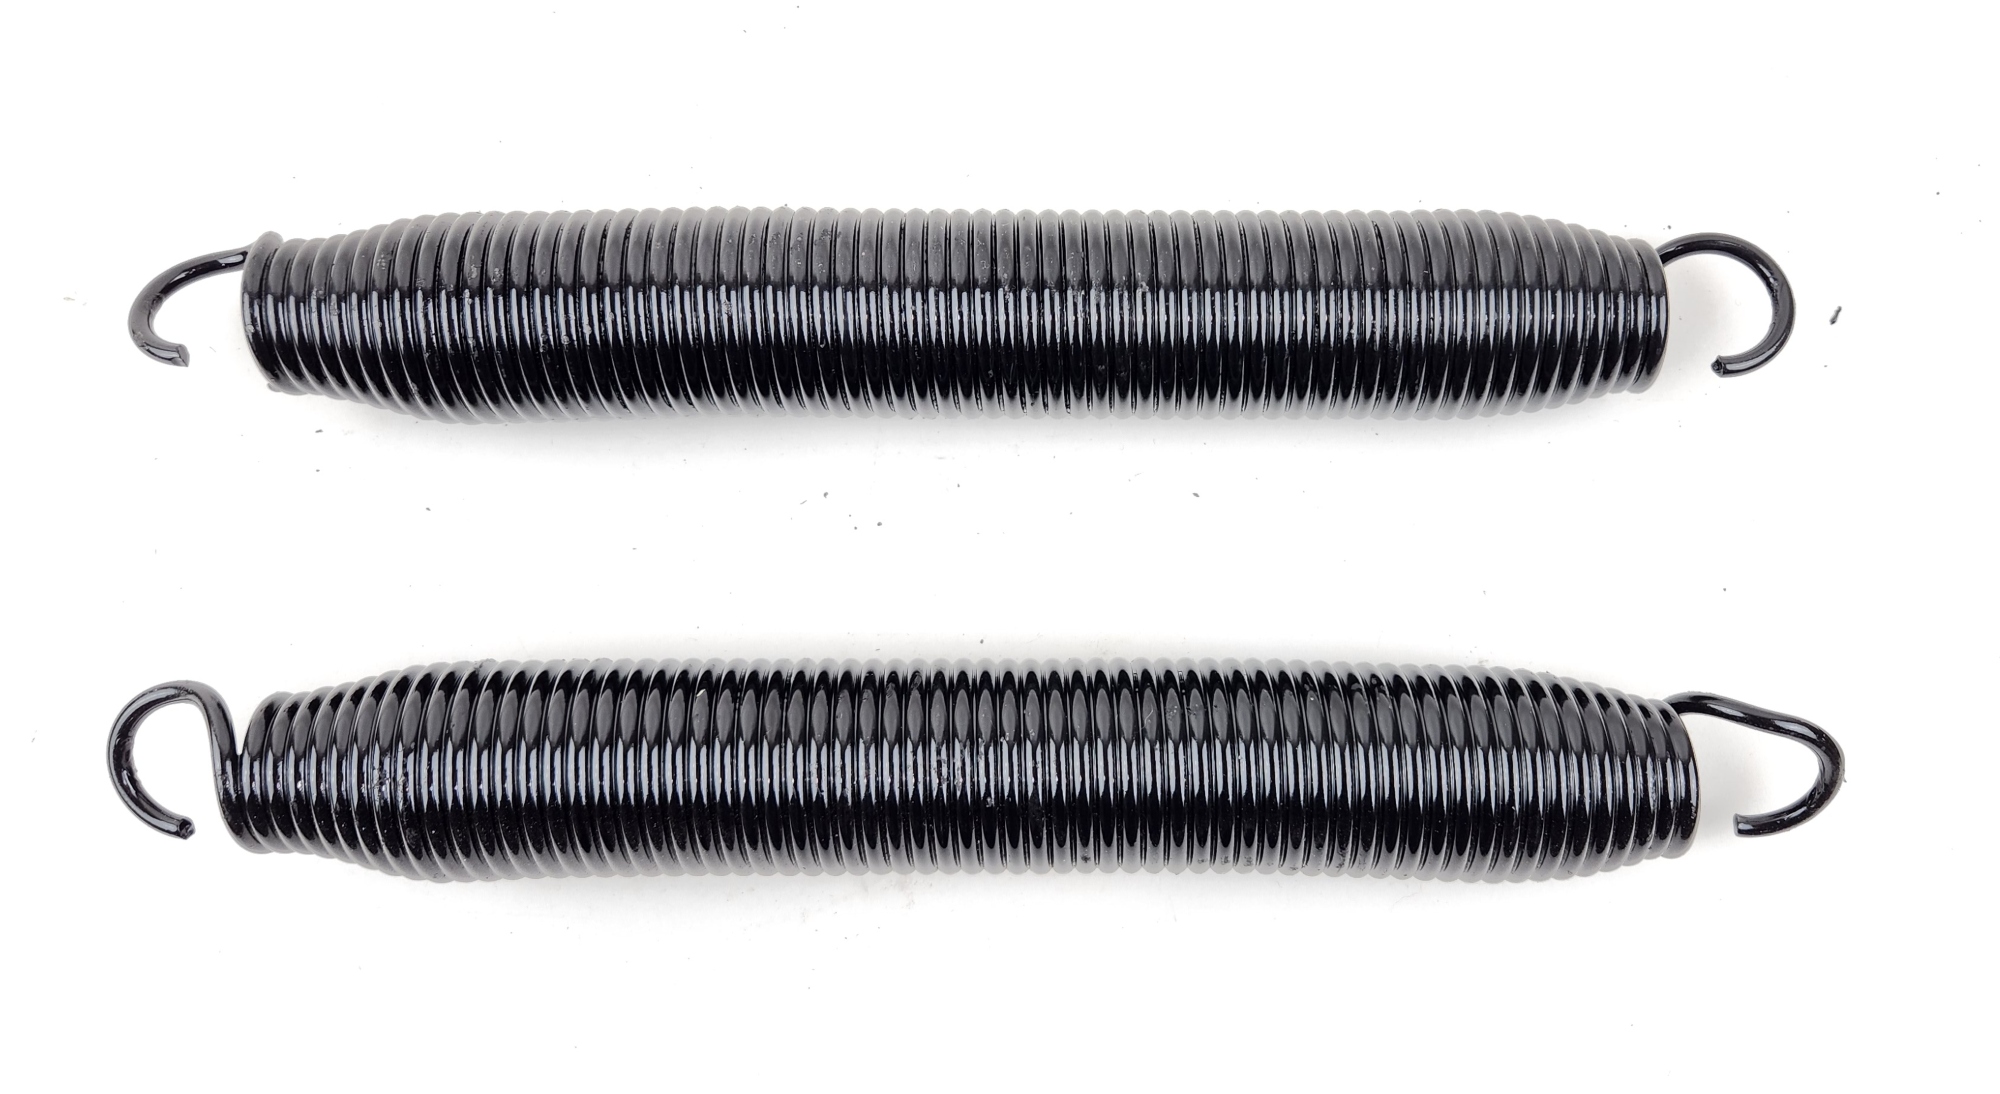 HWH R1171 Replacement Spring Kit for Hydraulic Leveling Jacks (2 Springs)